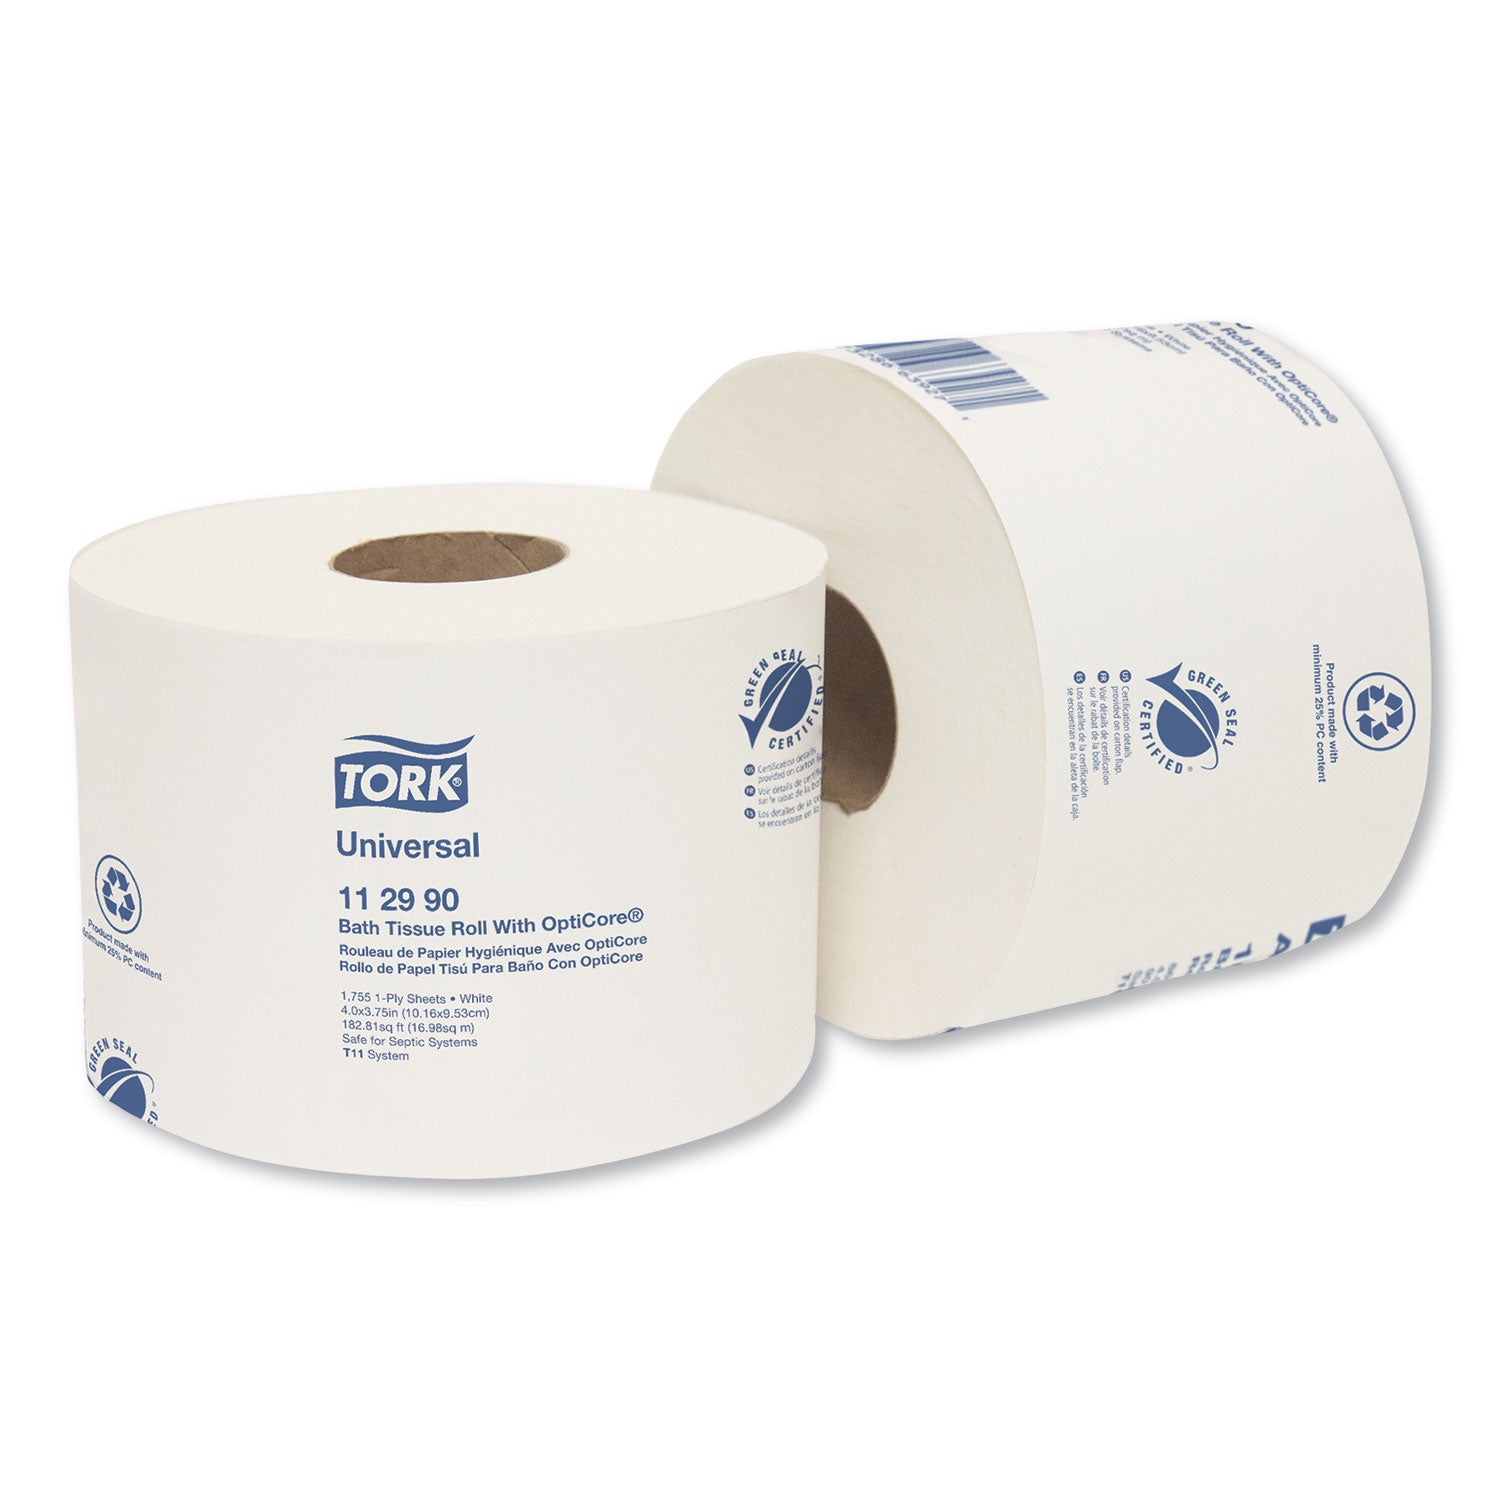 universal-bath-tissue-roll-with-opticore-septic-safe-1-ply-white-1755-sheets-roll-36-carton_trk112990 - 1